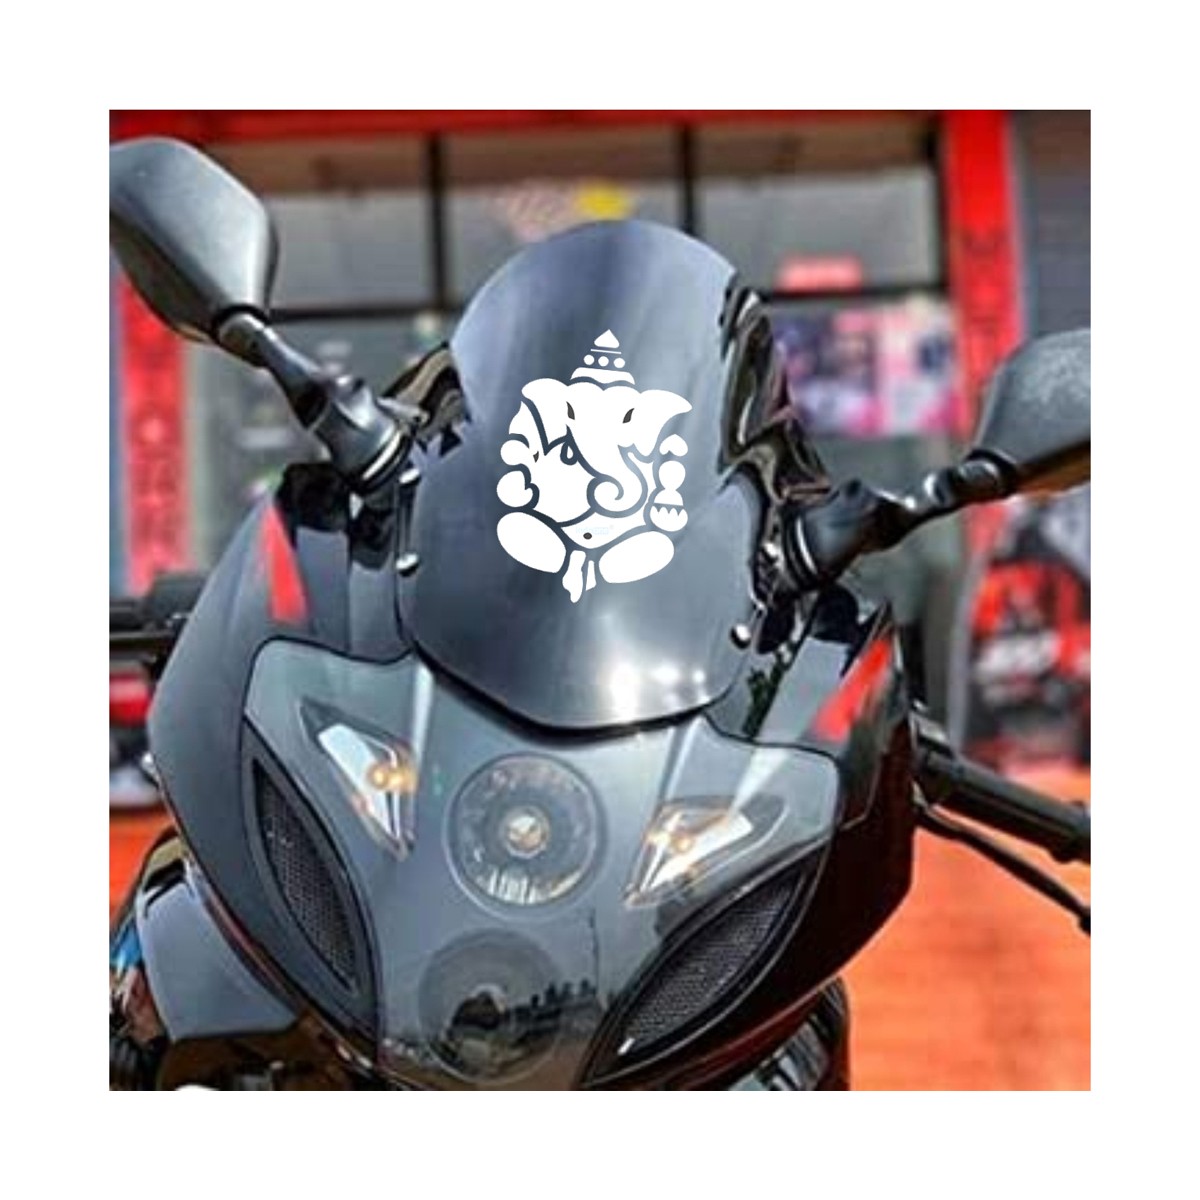 indnone® Lord Vinayagan Logo Sticker for Bike Water Proof PVC Vinyl Decal Sticker | White Color Standard Size